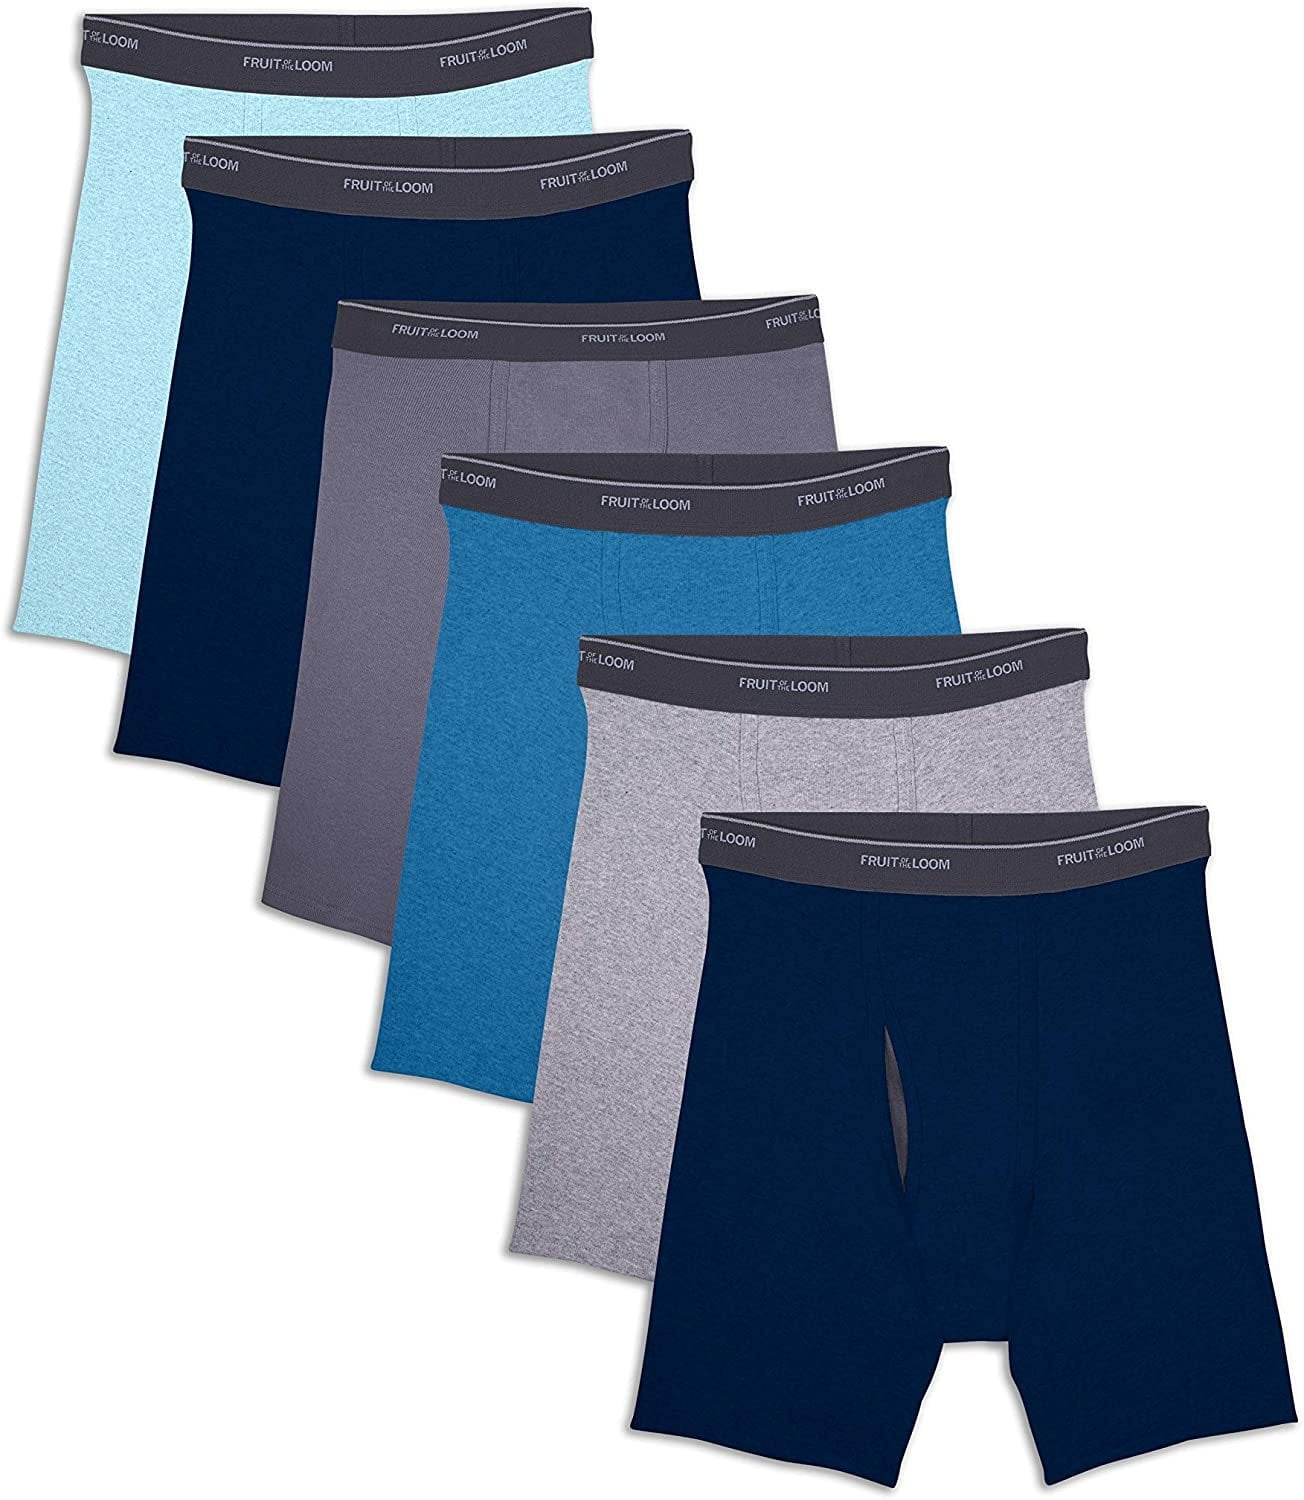 Fruit of the Loom Men's CoolZone Fly Boxer Briefs, 6 Pack 